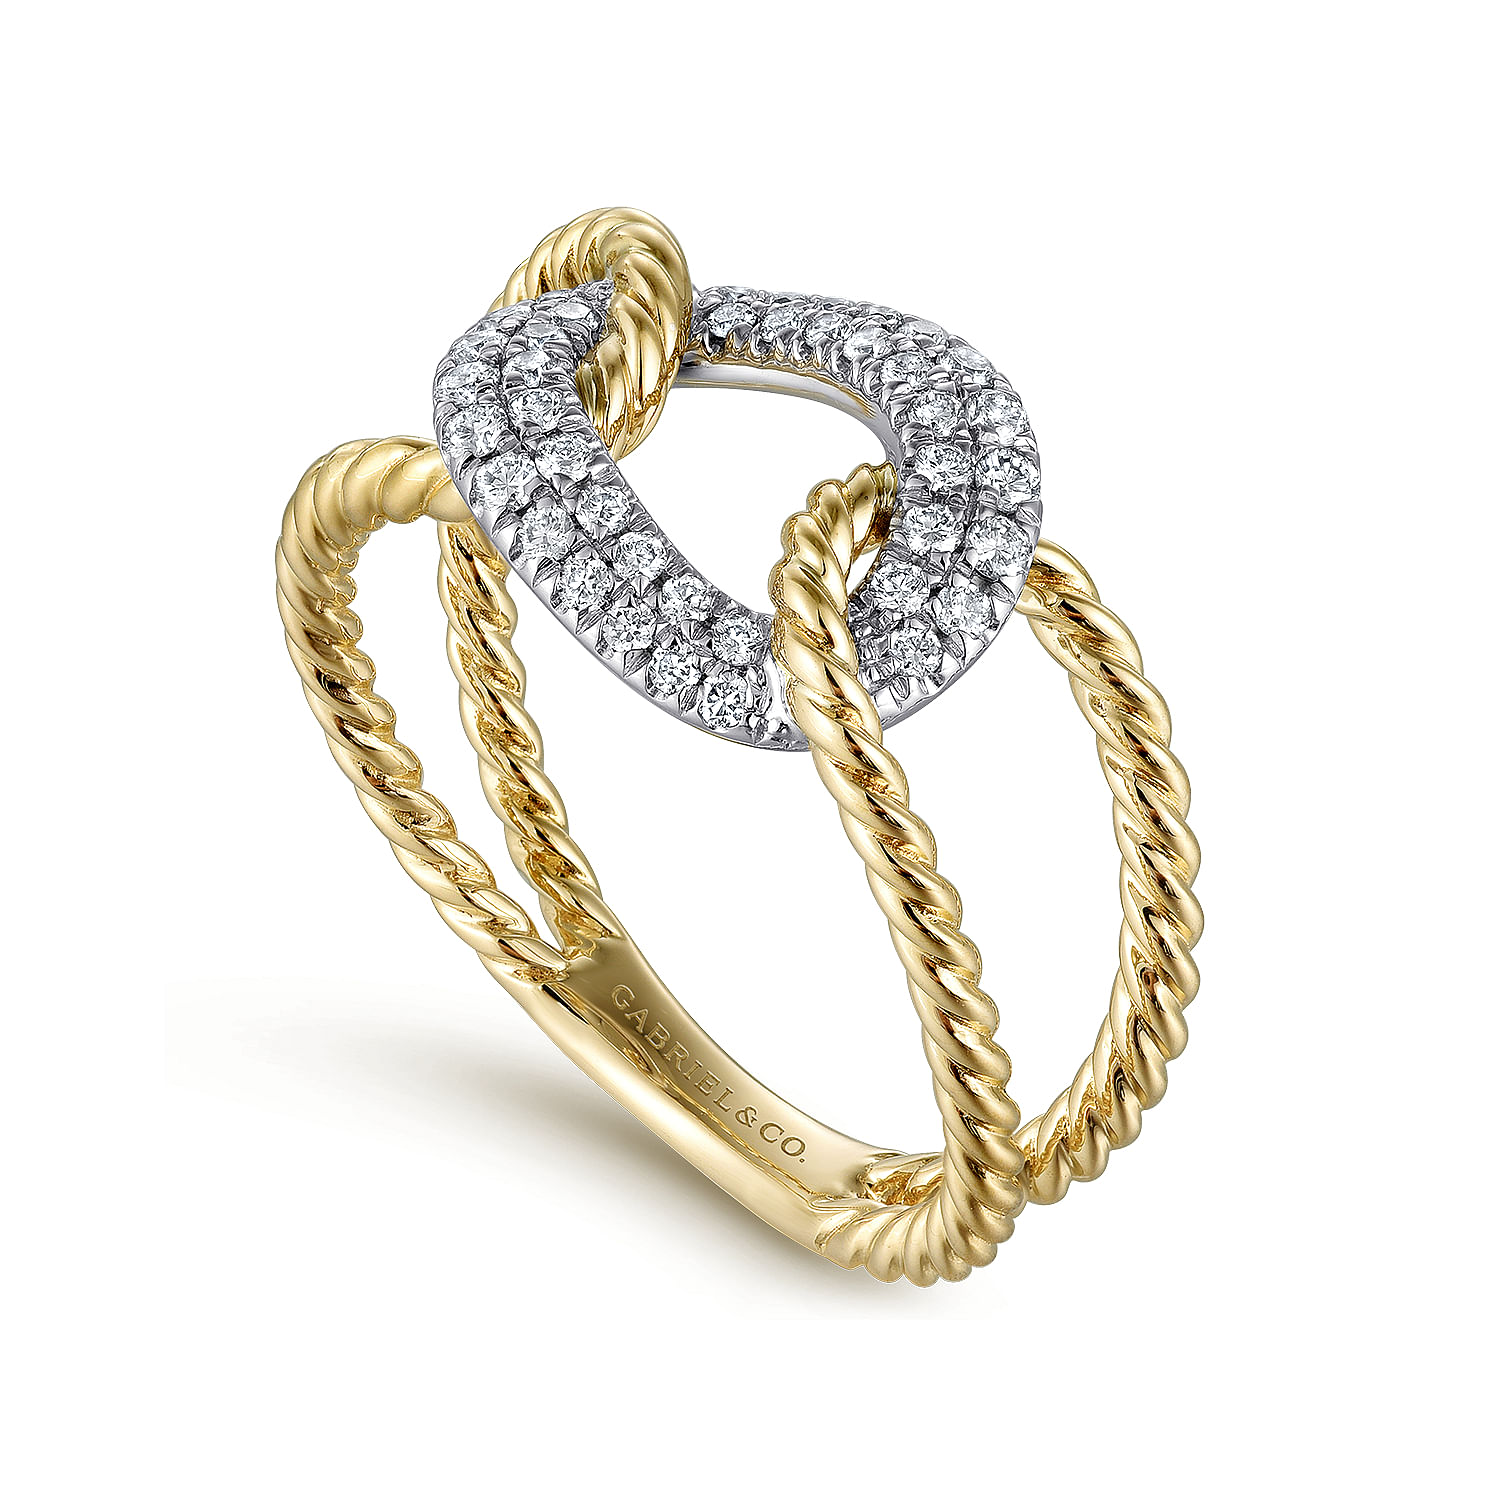 14K Yellow and White Gold Twisted Rope Link Ring with Diamond Pavé Station